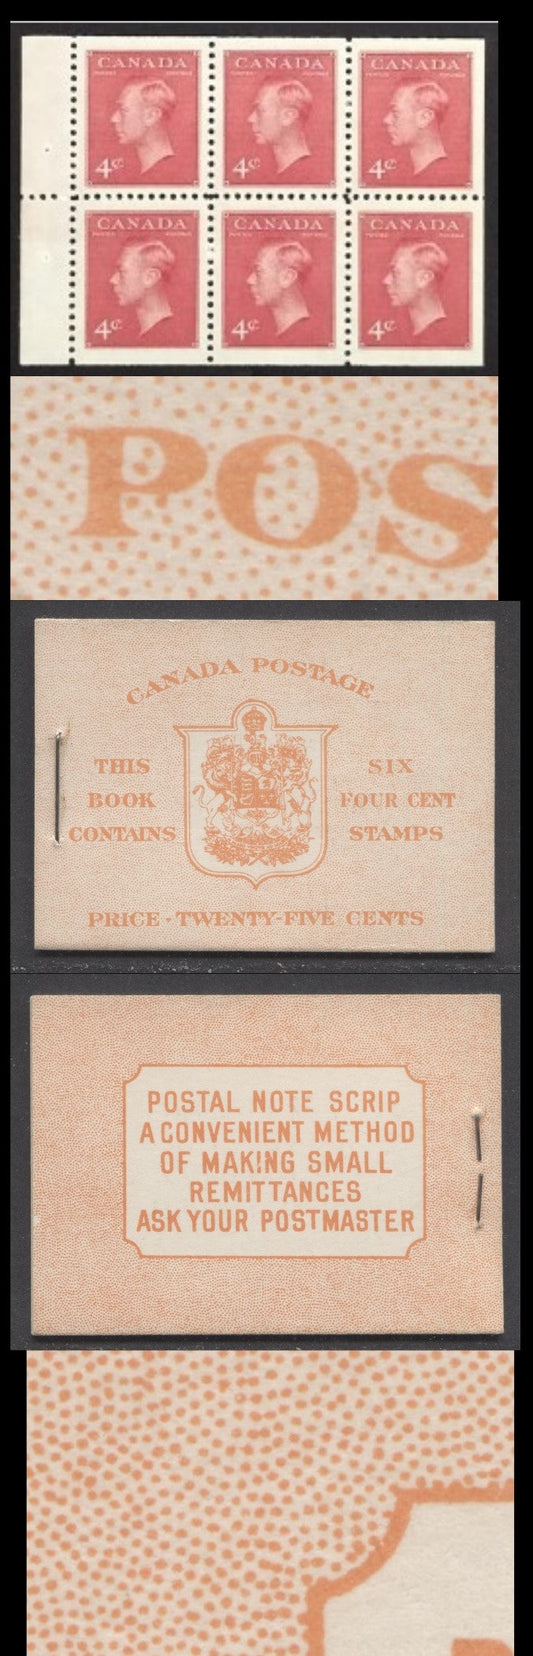 Lot 88 Canada #BK41aE 1949-1951 KGVI Issue, A Complete 25c English Booklet With 4c Dark Carmine, Pane Of 6. Front Cover IIi, Back Cover Caii, Type I Cover, 7c & 5c Rates, 'Postmaster', 450,000 Issued